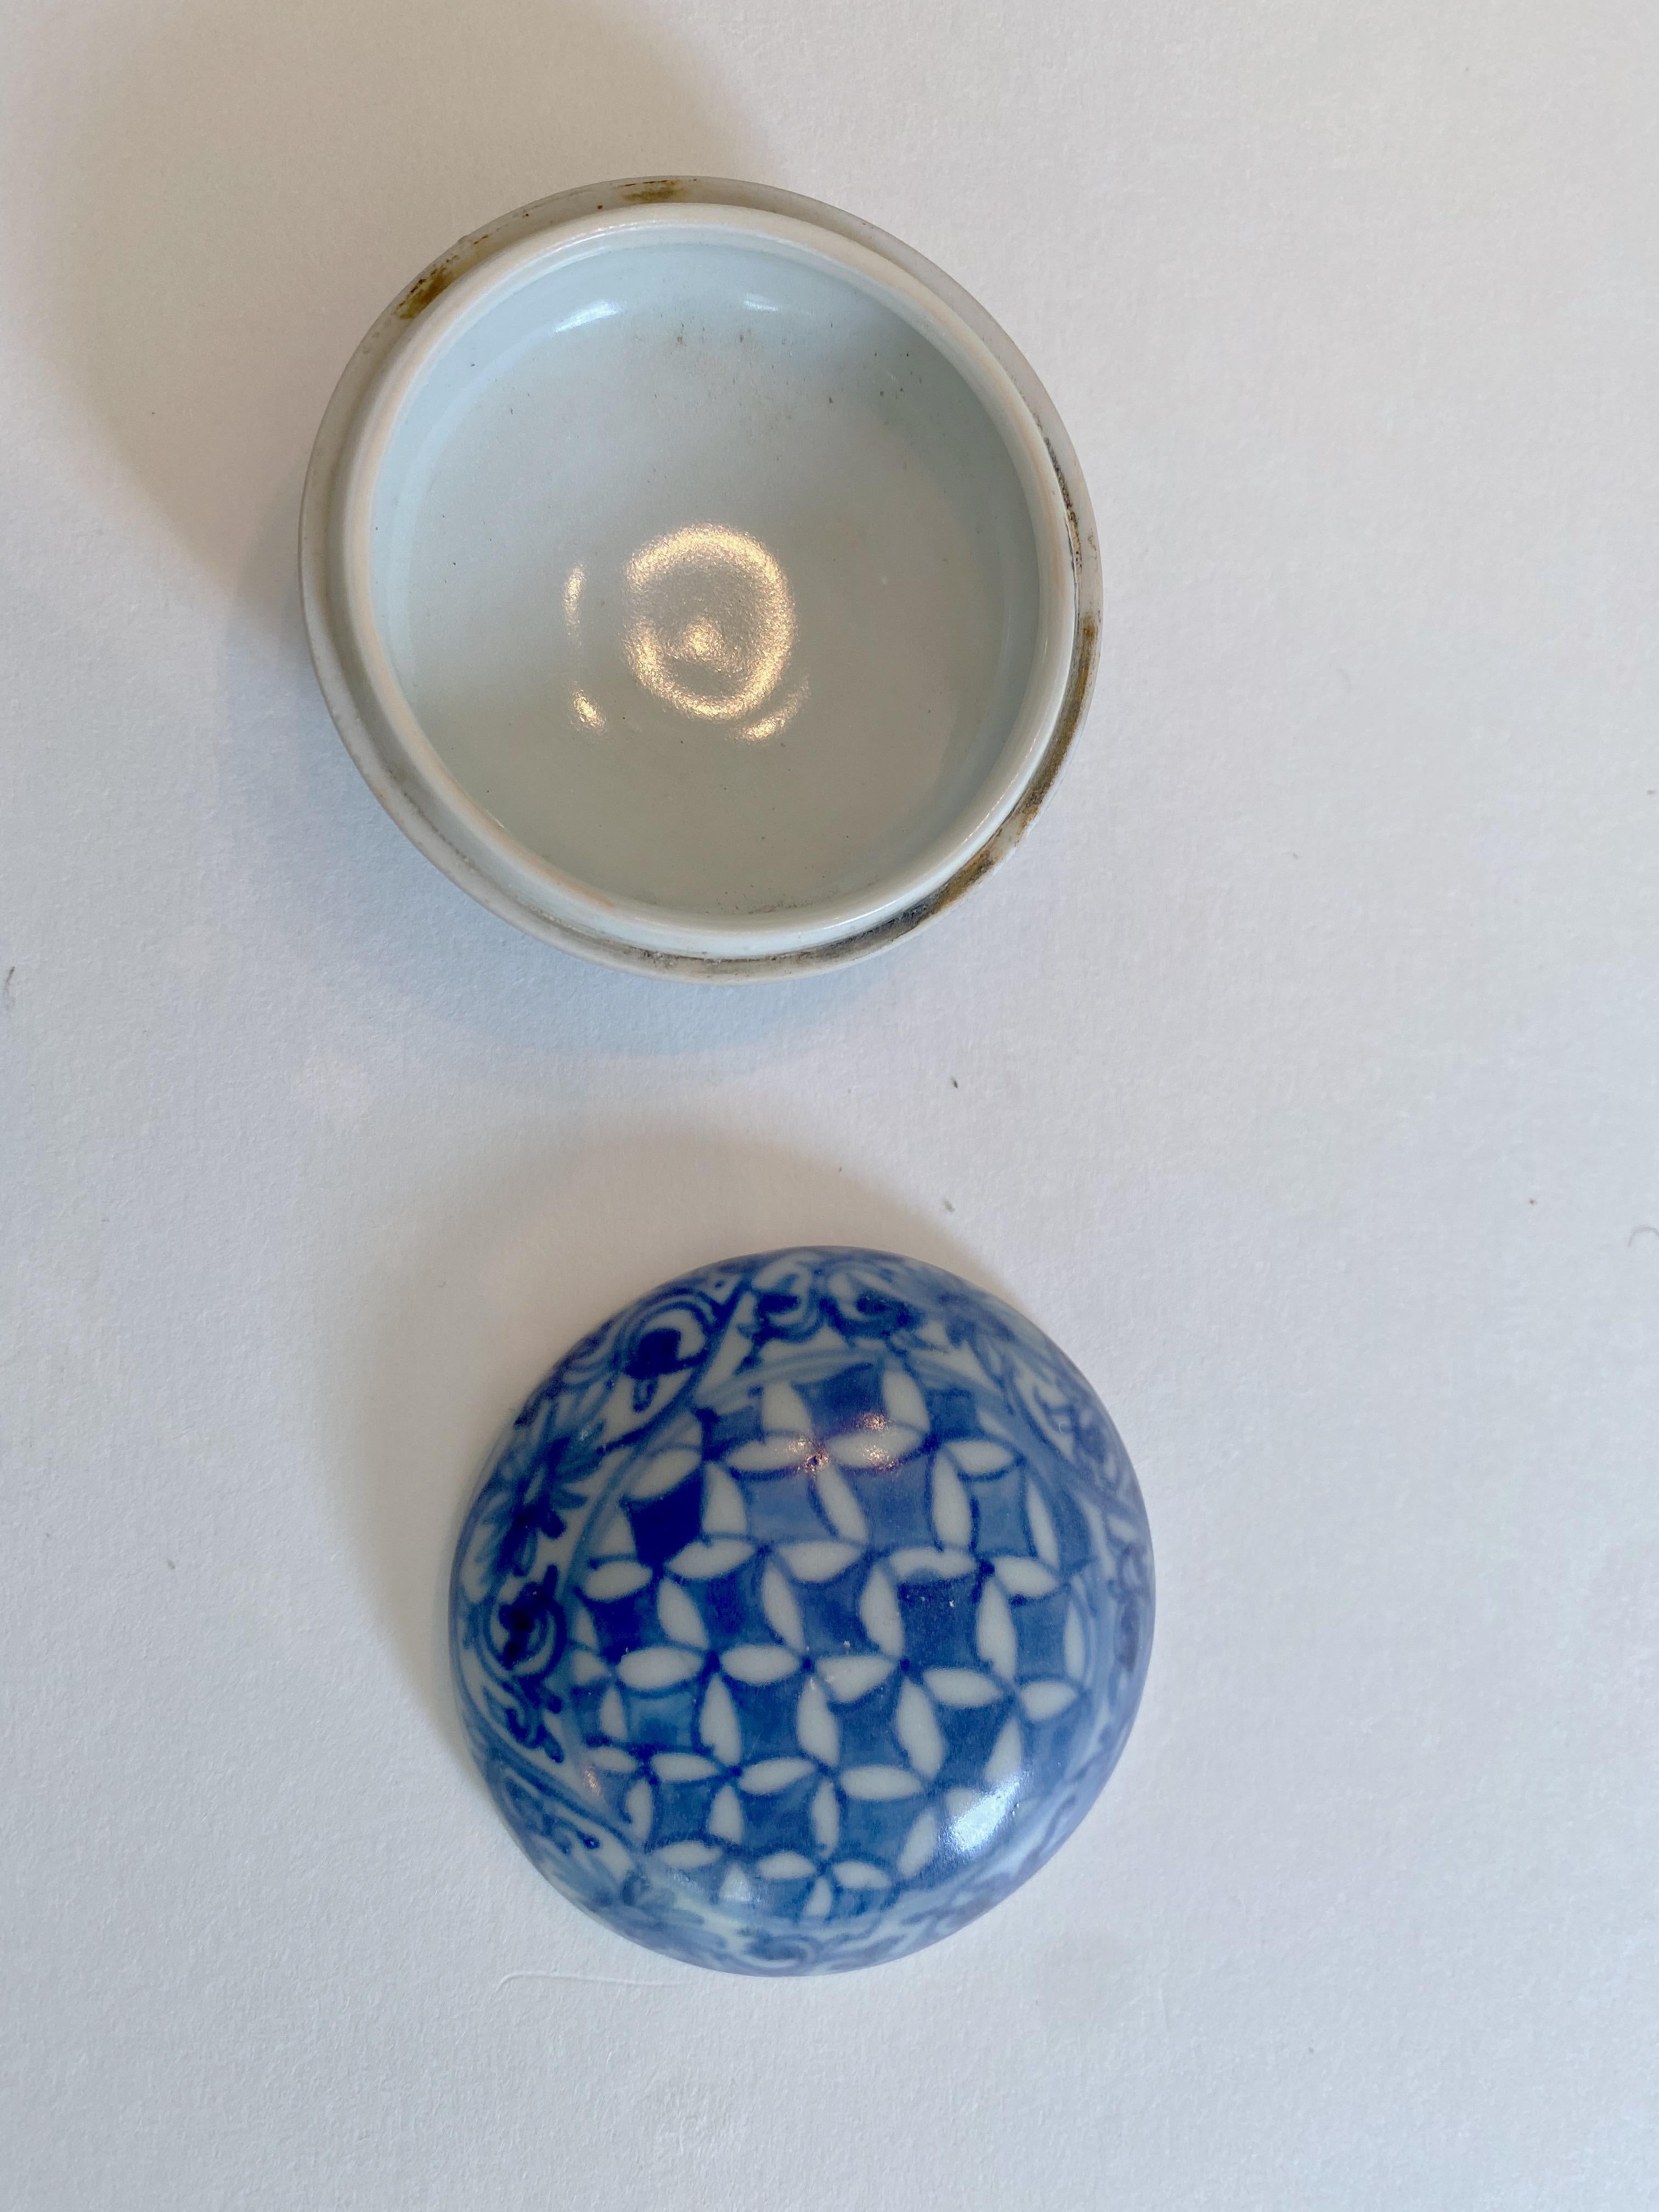 18th Century and Earlier Blue and White Porcelain Box from the Hatcher Collection (Item C)